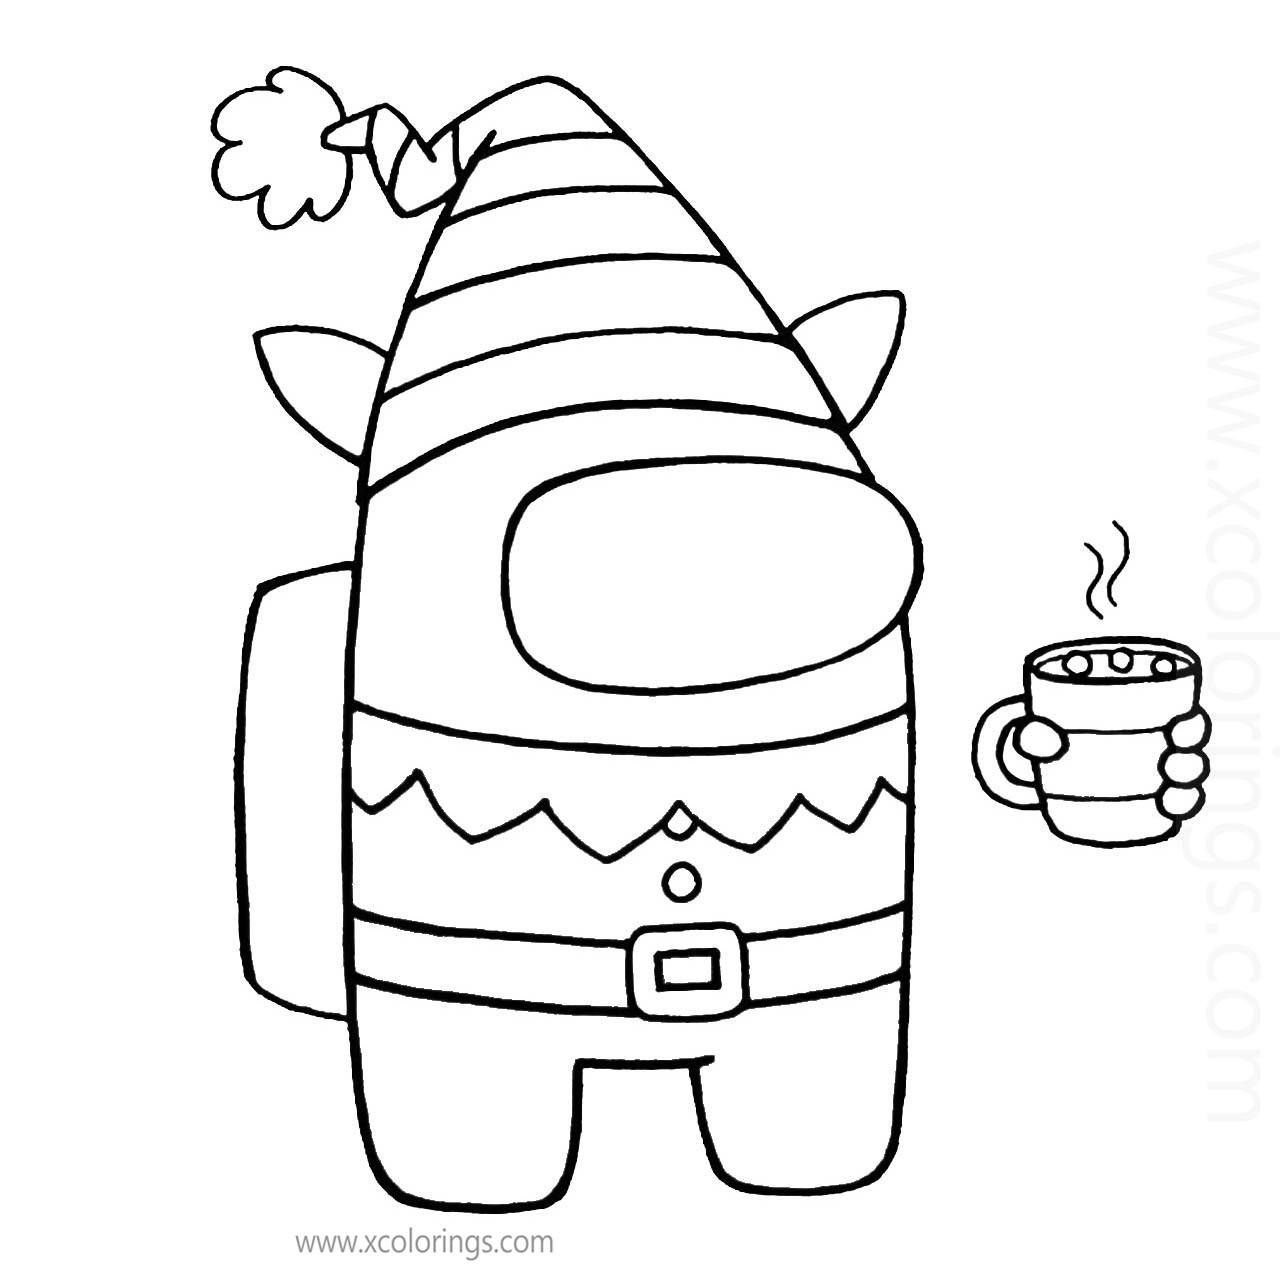 Drawing Among Us Coloring Pages Impostor / How Do You Like